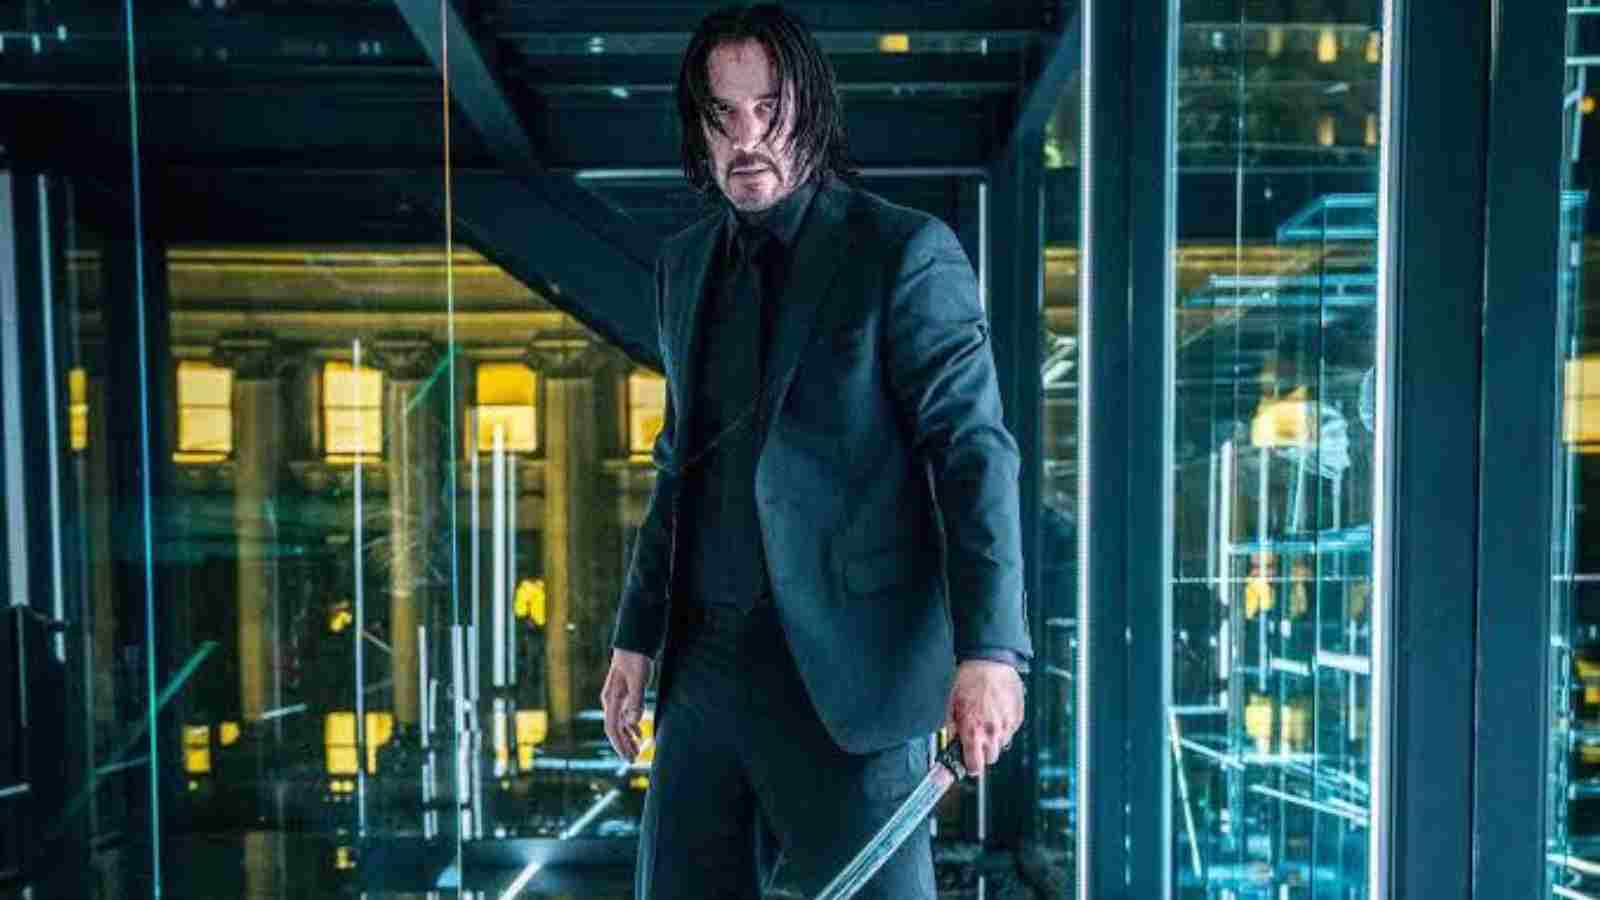 The original John Wick character was 75-year-old